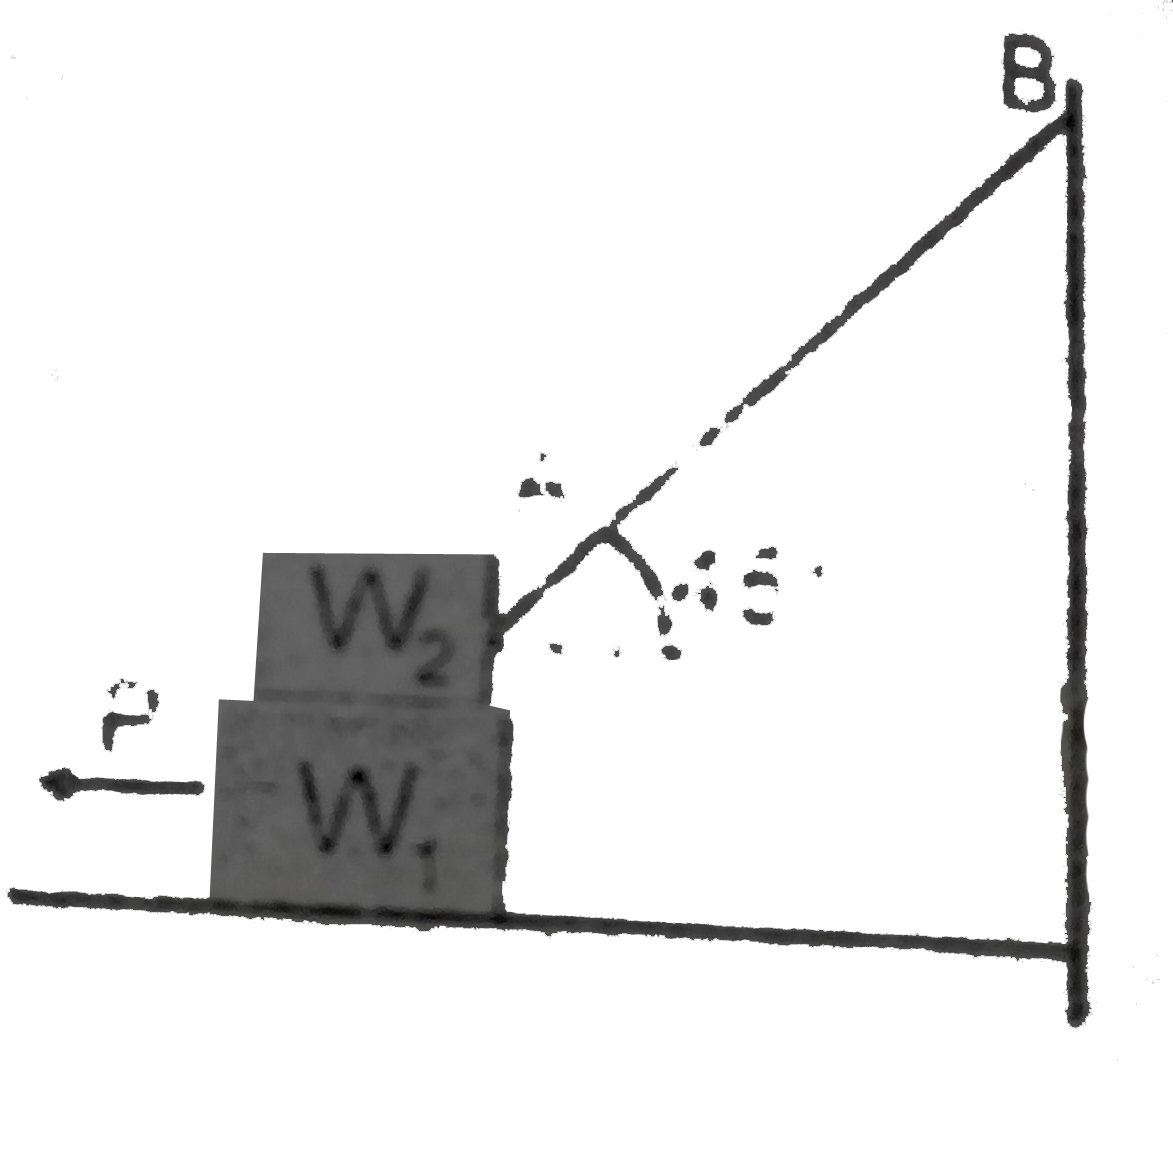 In the arrangement shown, W(1) = 200N, W(2) = 100 N,mu = 0.25 for all surfaces in contact. The block W(1) just slides under the block W(2)